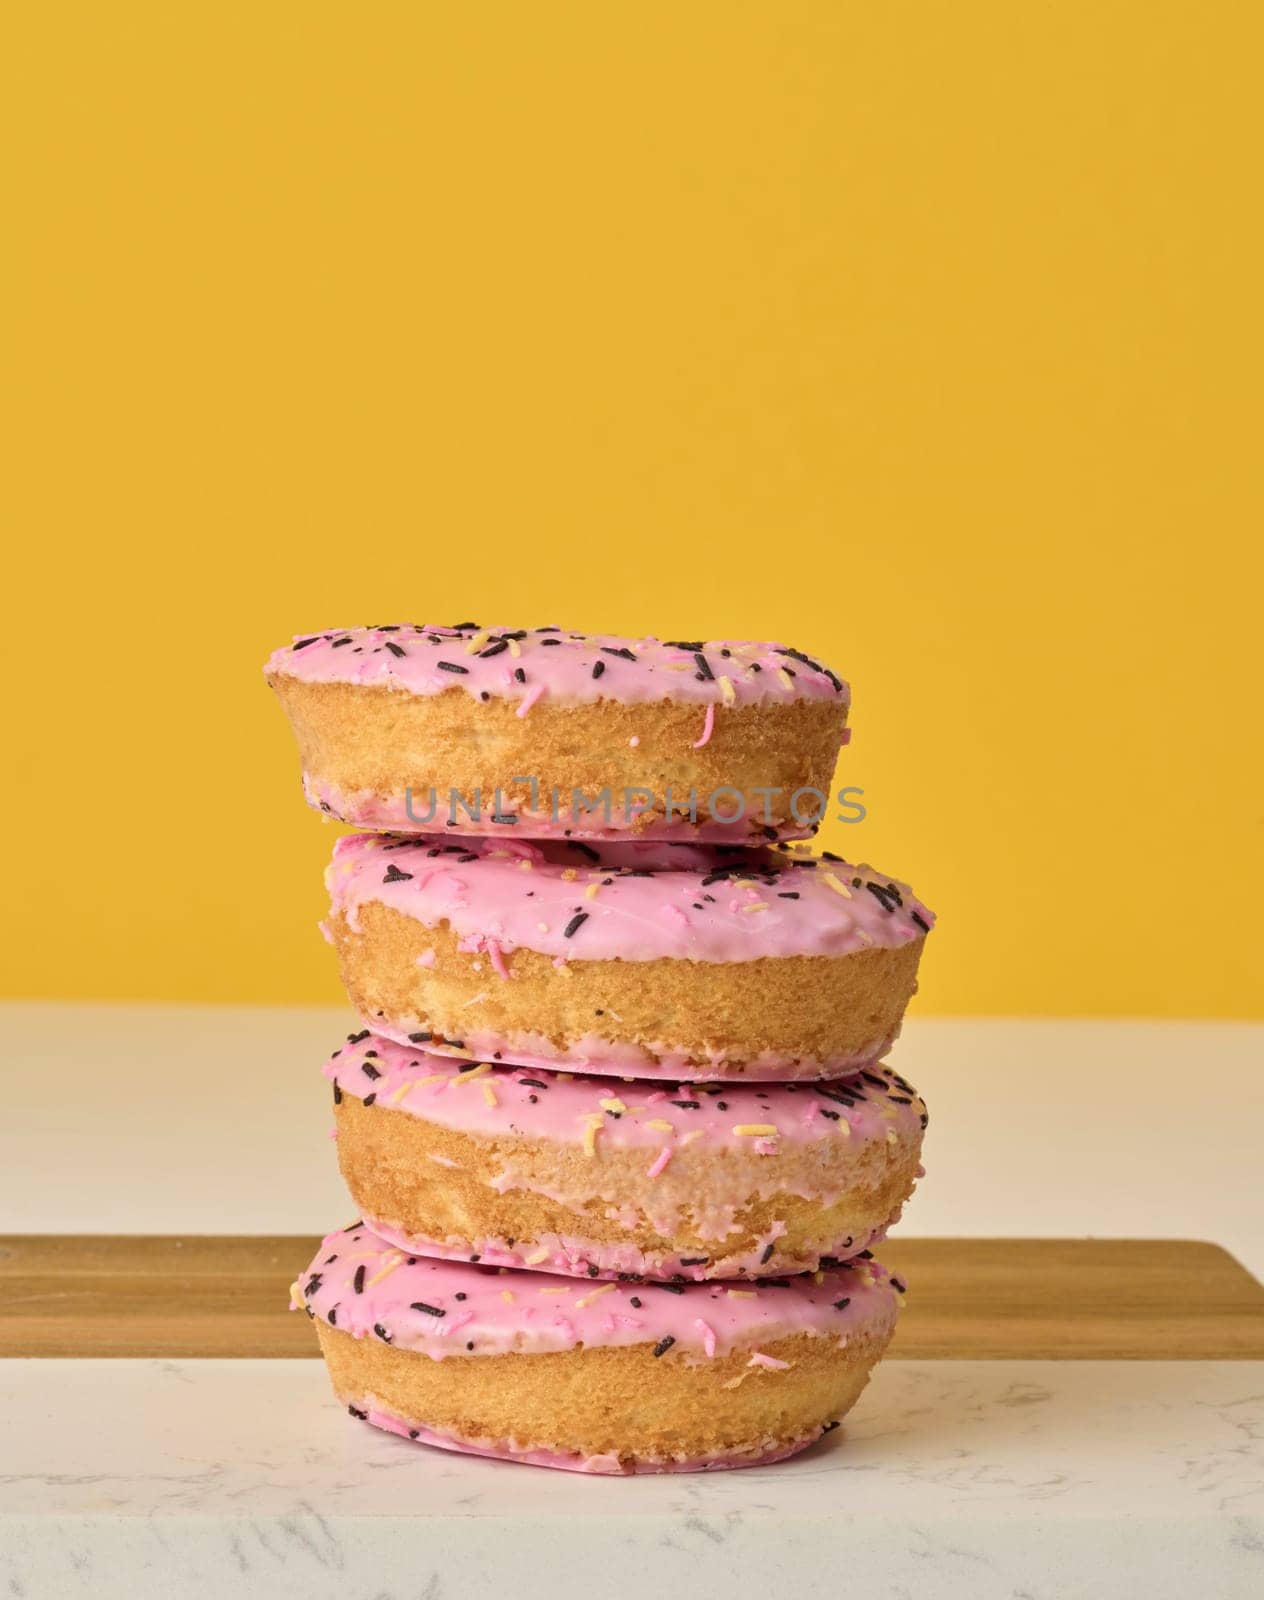 Donut covered with pink glaze and sprinkled with colorful sprinkles, yellow background by ndanko